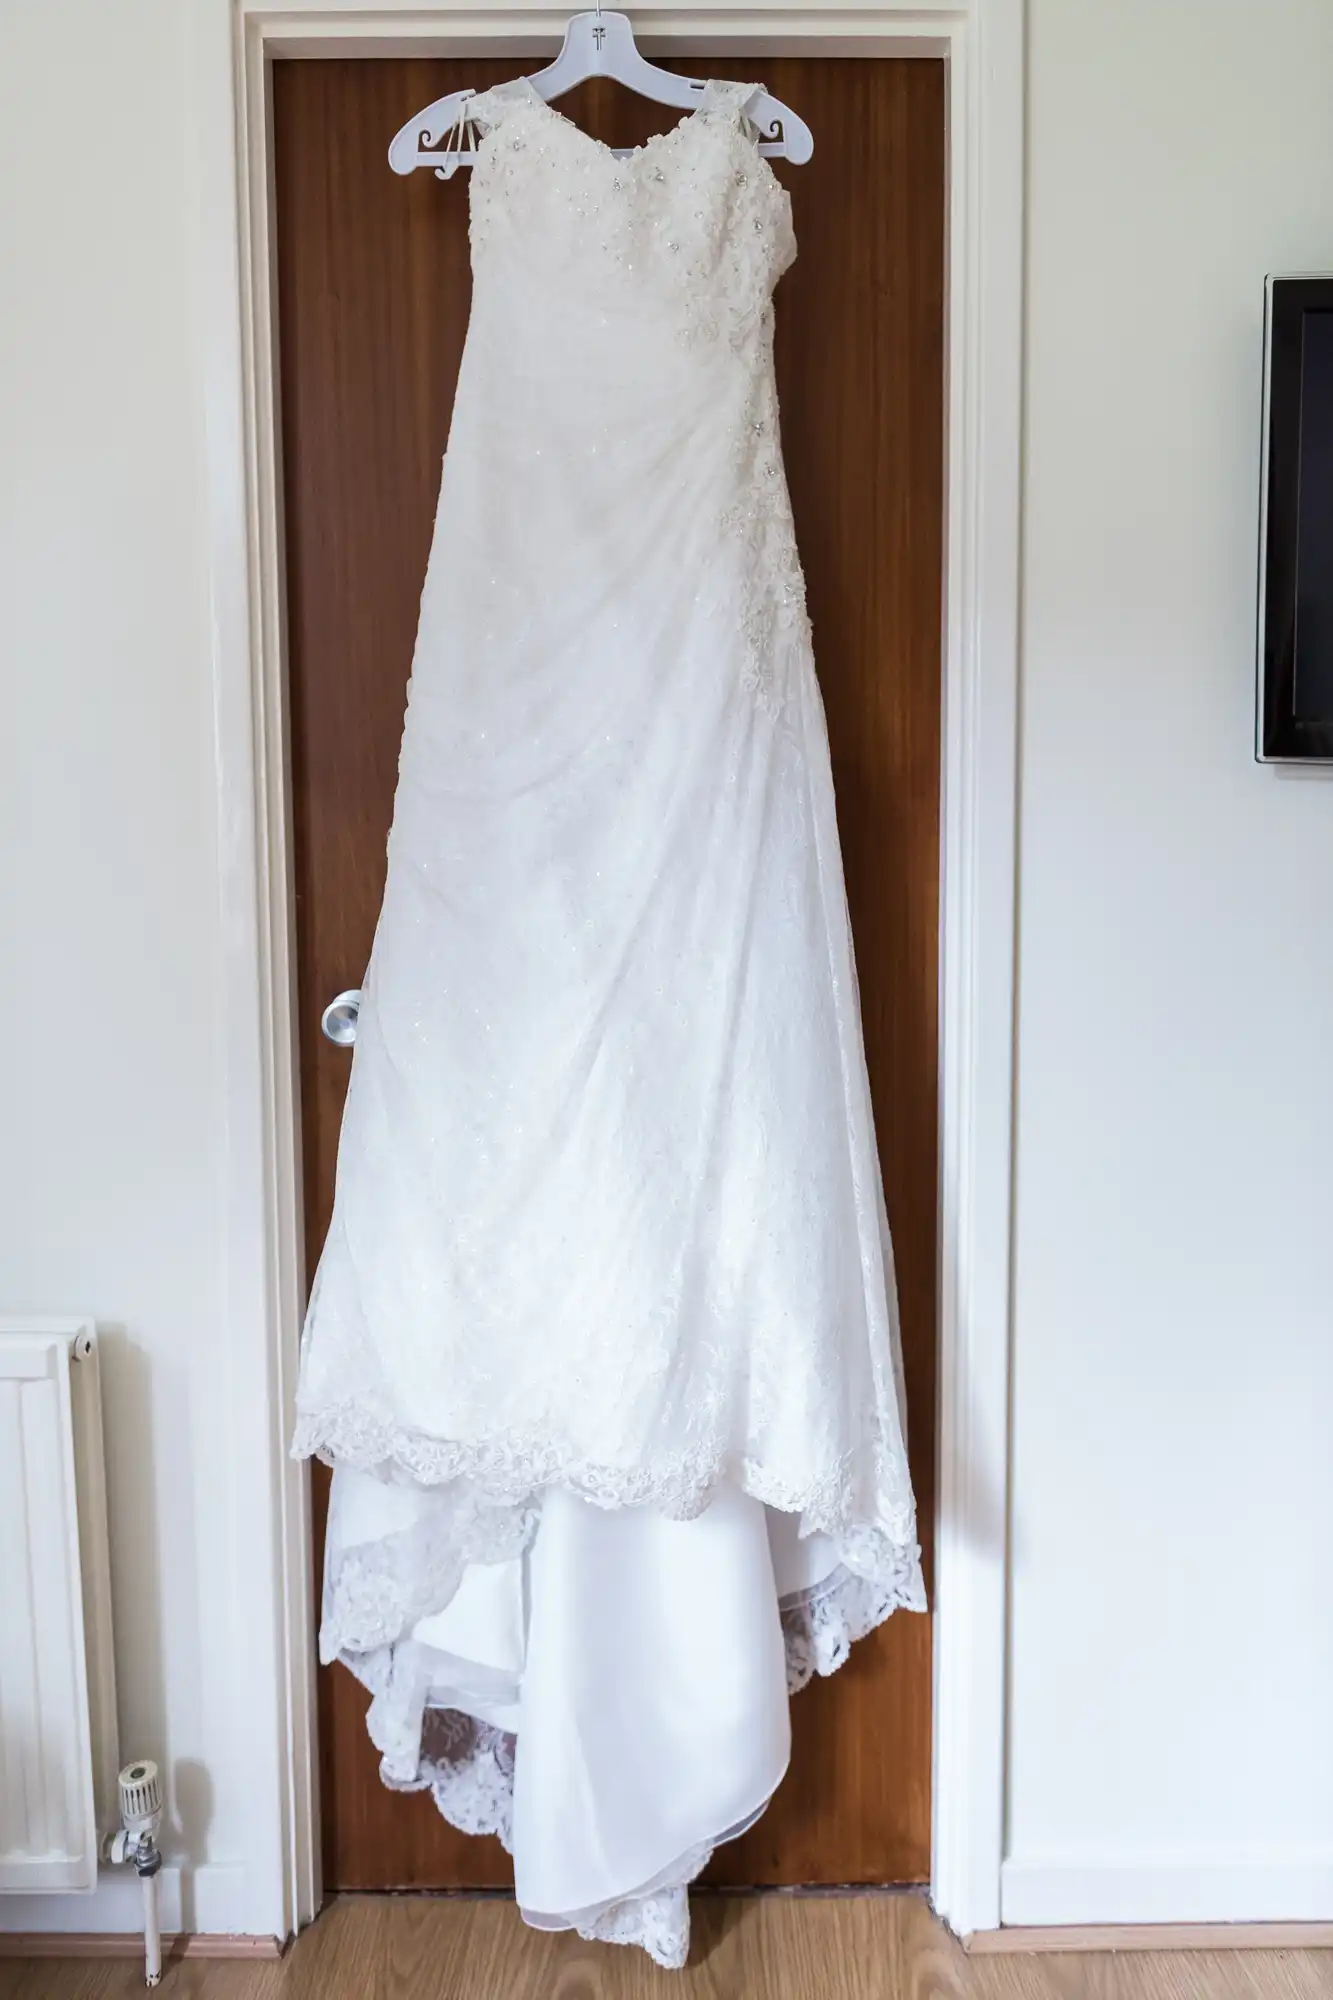 A white wedding dress with lace detailing hanging on a wooden door in a well-lit room.